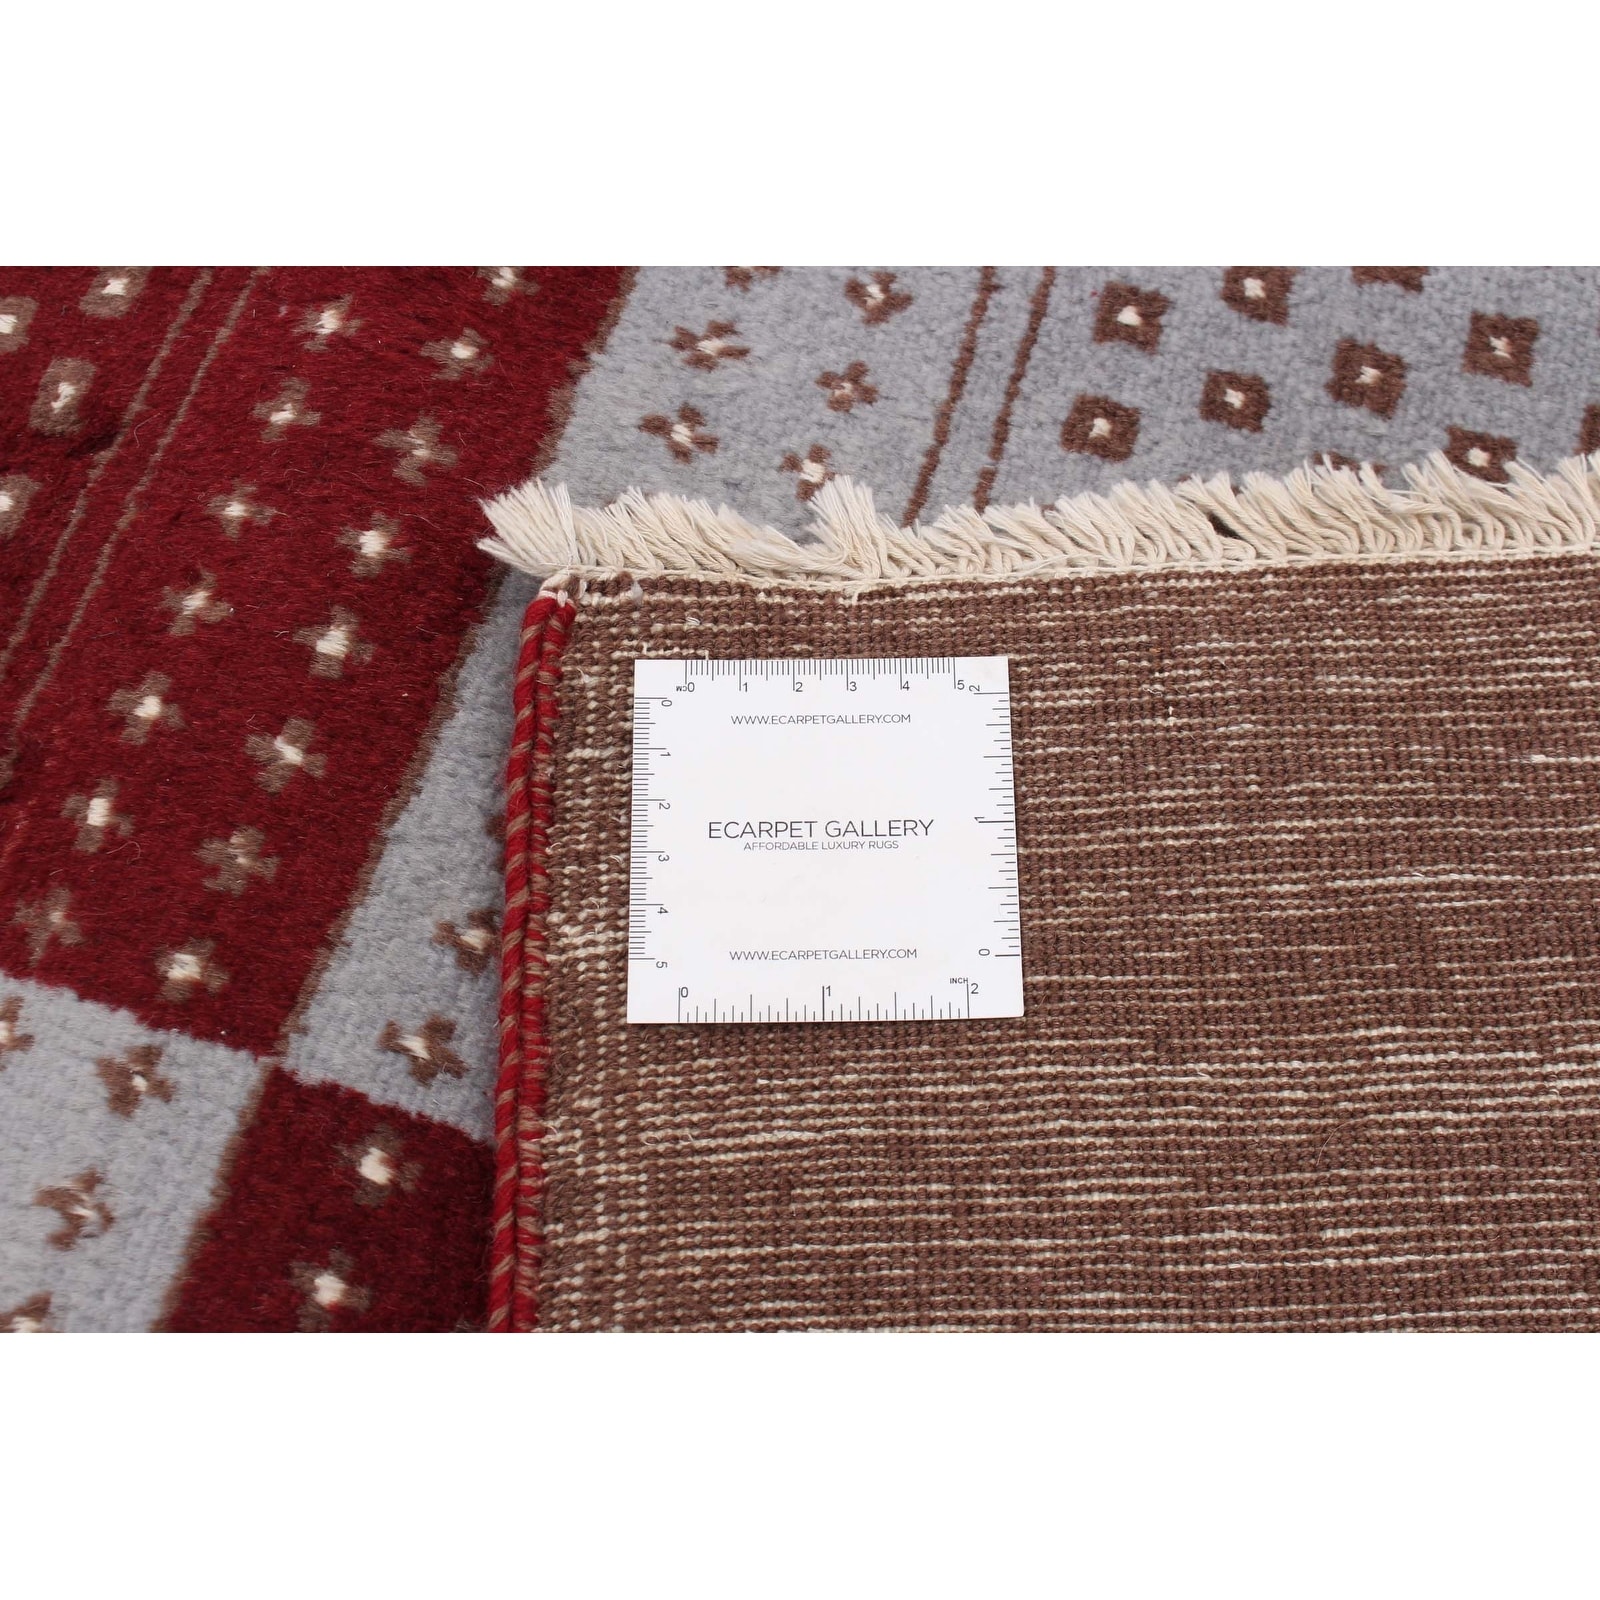 Finest Peshawar Ziegler Casual Brown Rug 8'0 x 10'0 Hand-Knotted Wool Rug 362359 eCarpet Gallery Large Area Rug for Living Room Bedroom 